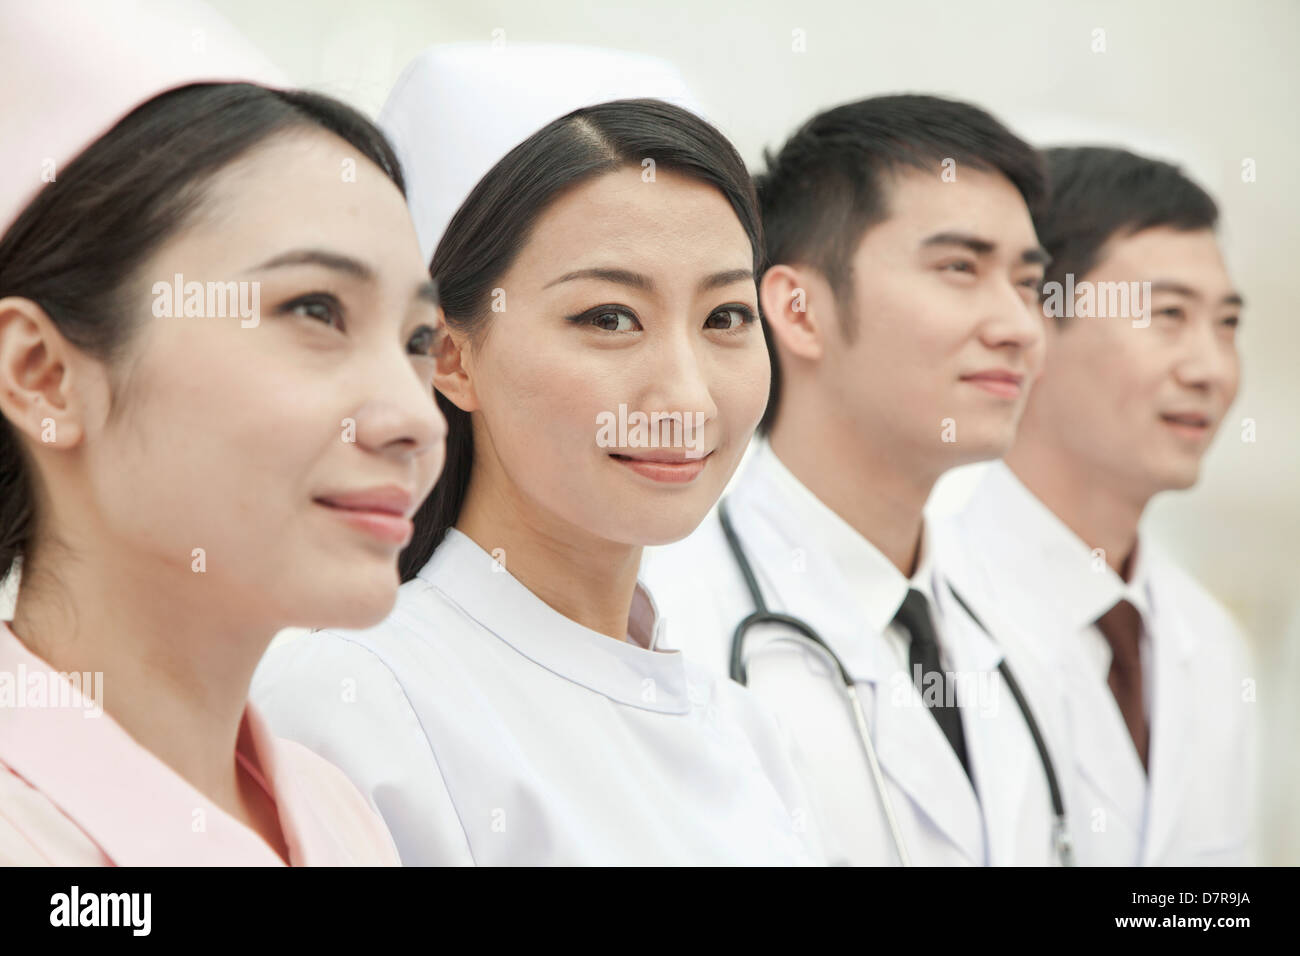 Healthcare workers standing in a row, China Stock Photo